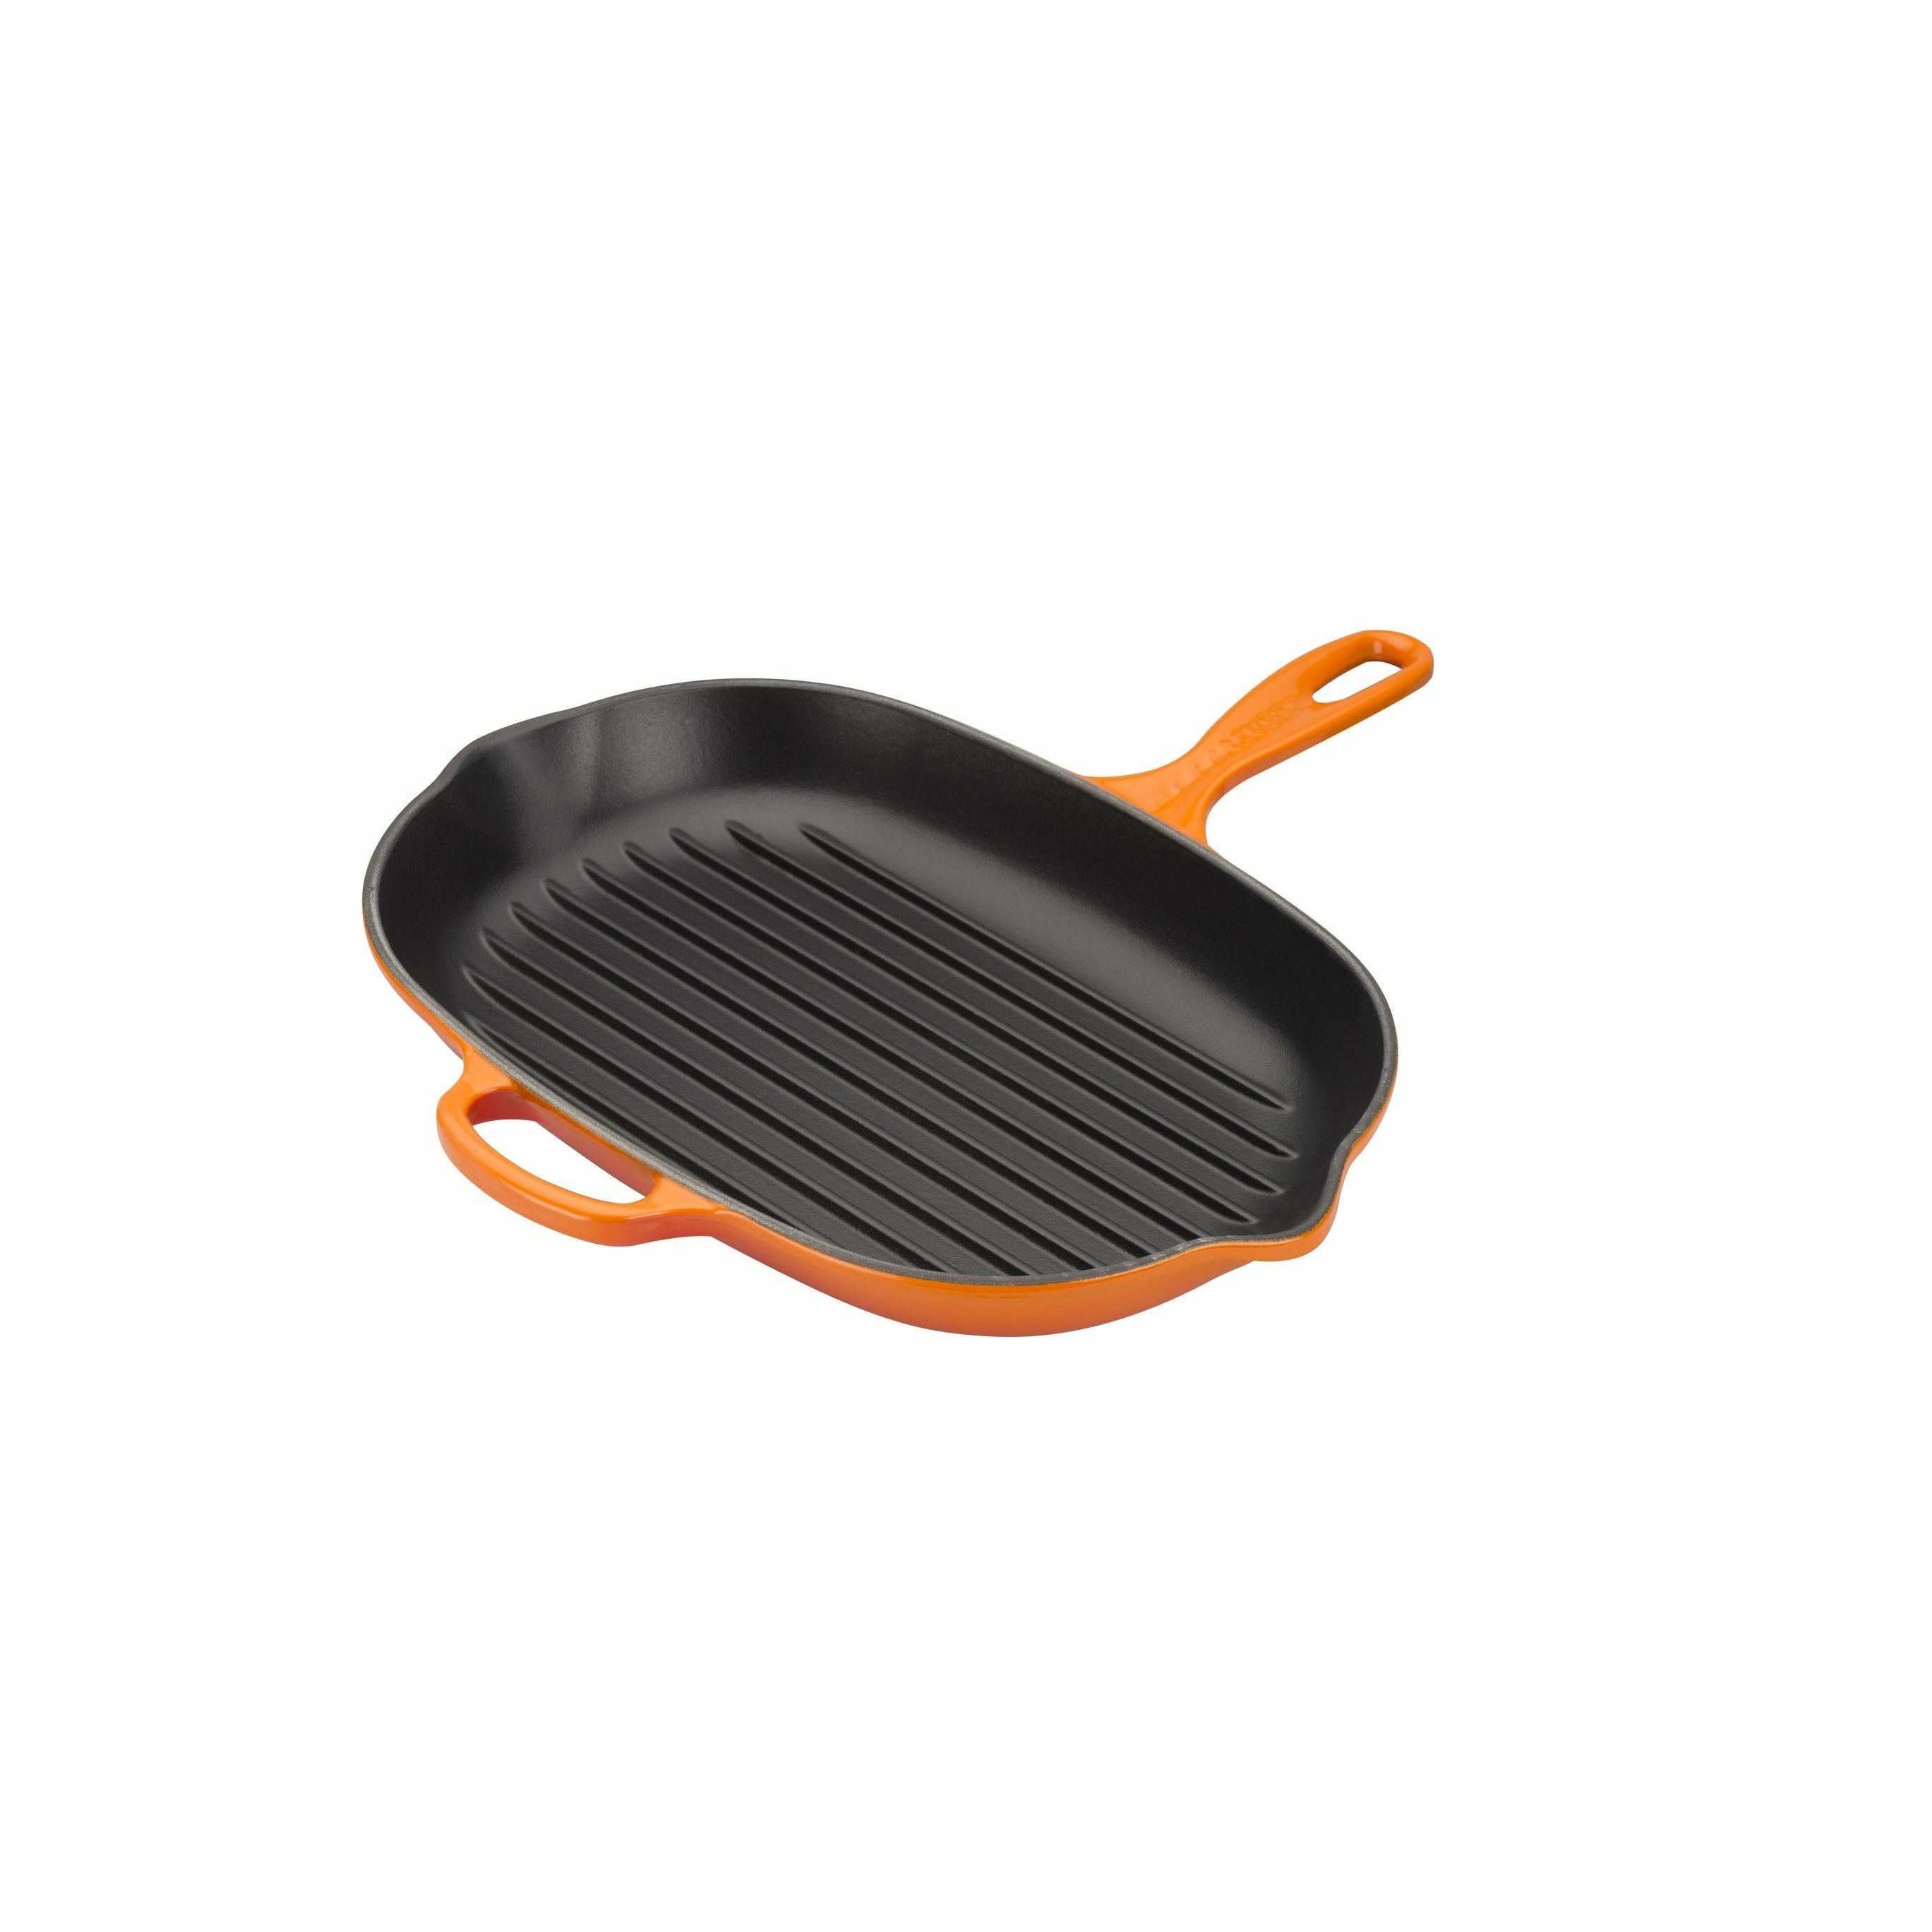 Le Creuset Natuur ovale grill pan 32 cm, oven rood